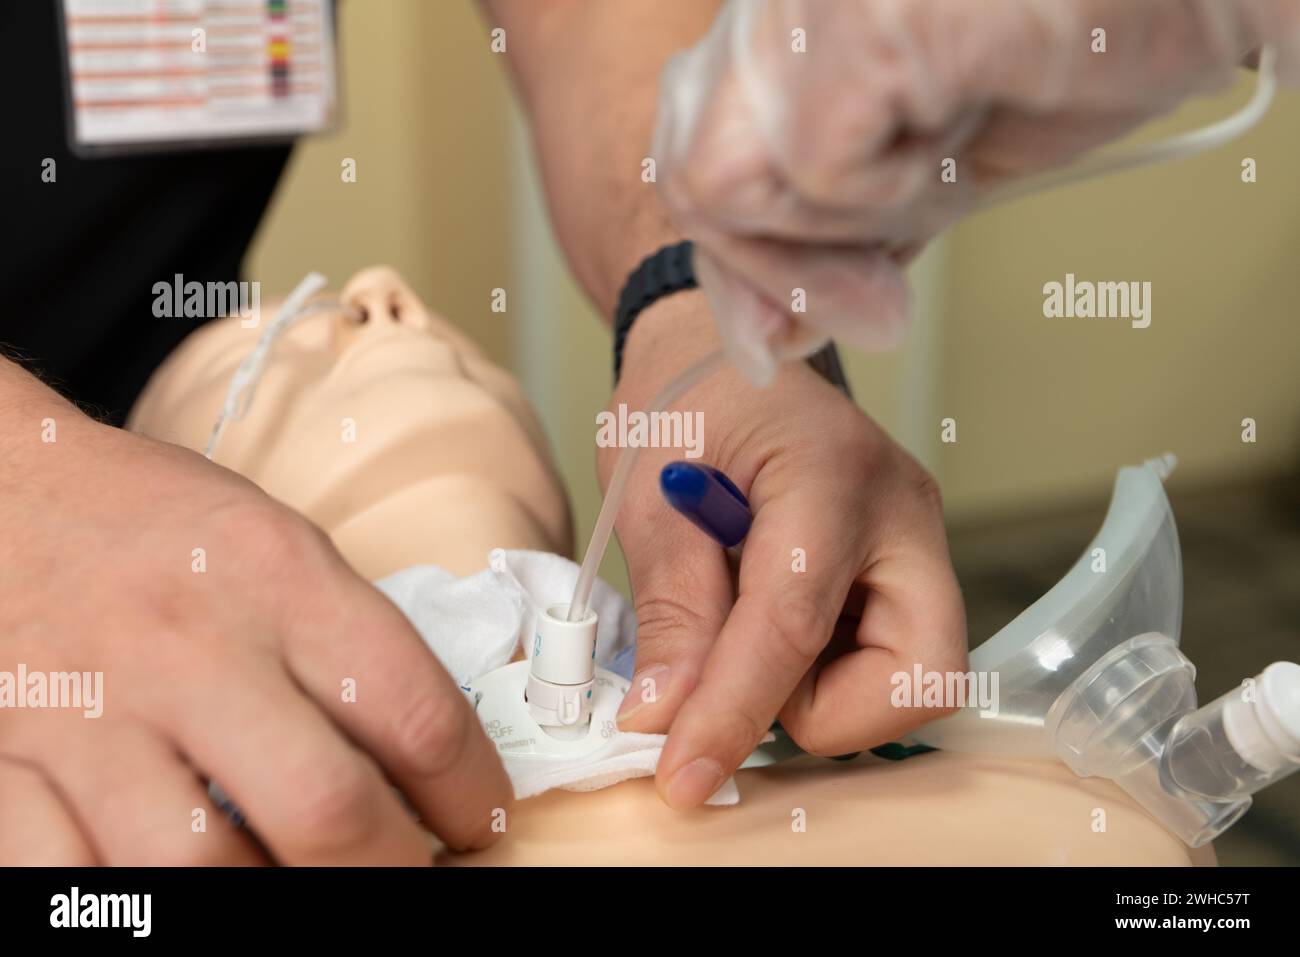 A Person Putting Oxygen On A Mannequin Person's Hand Holding A Tube. Stock Photo